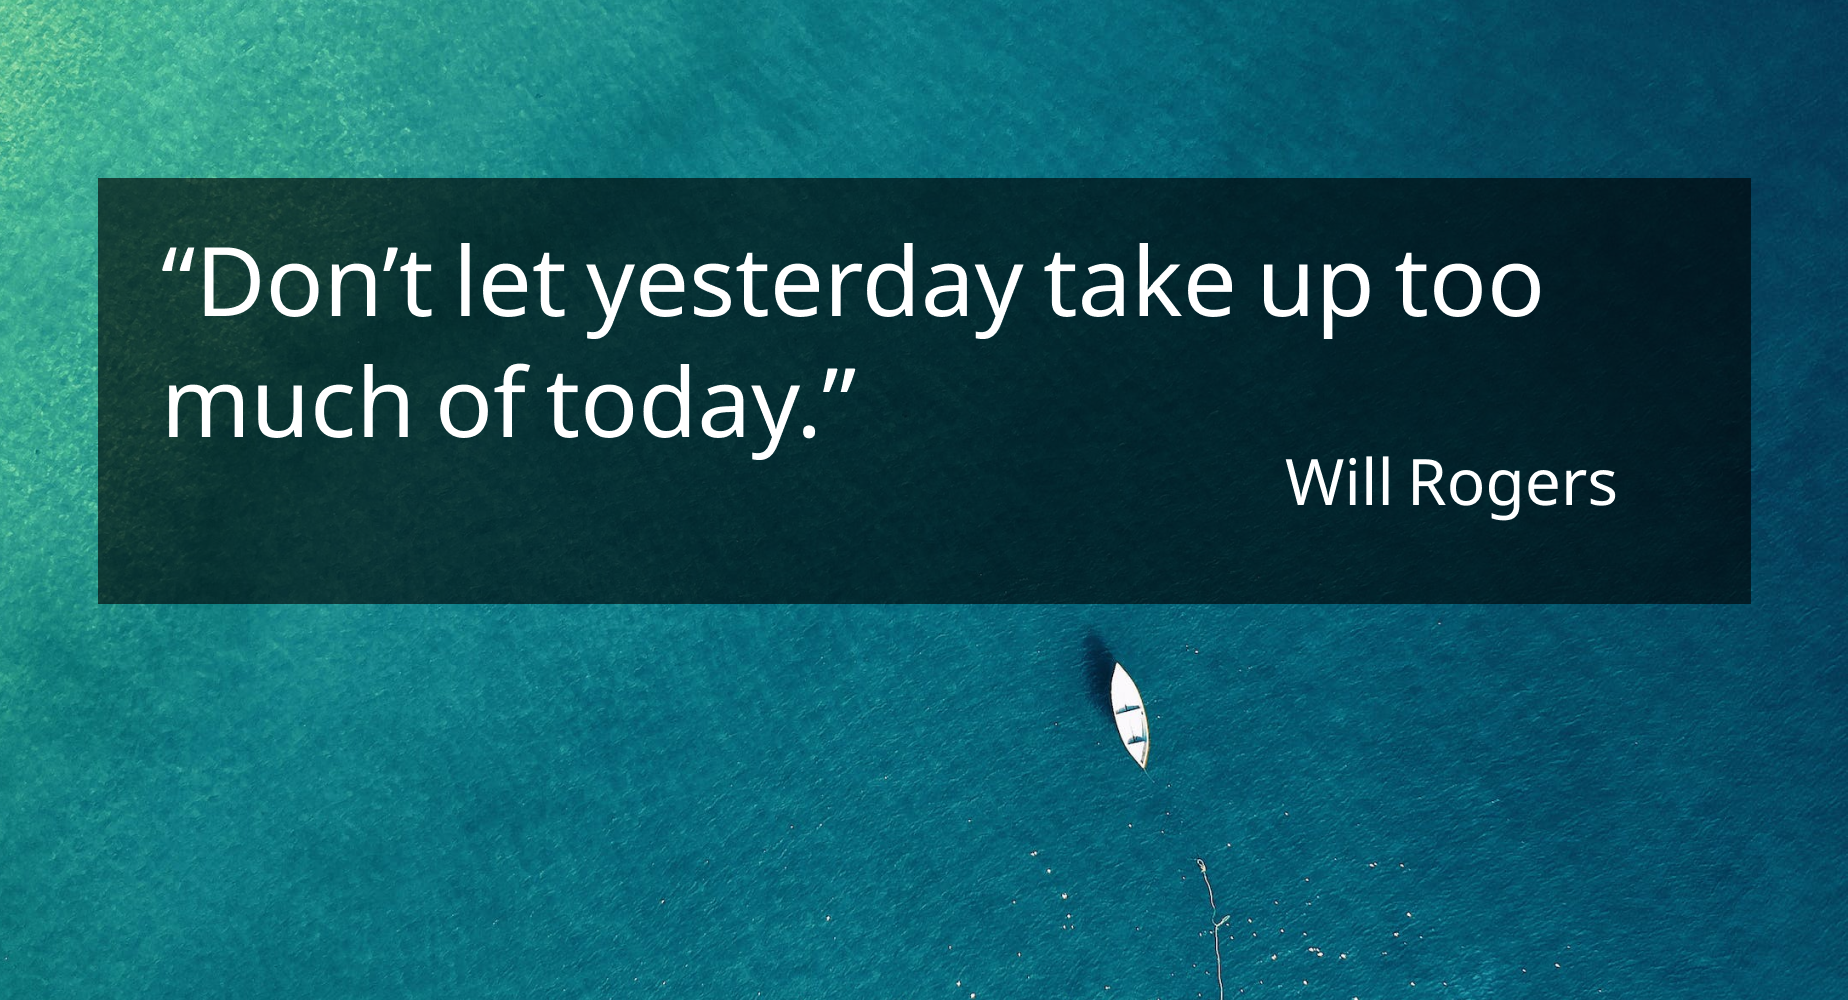 Motivational quote from Will Rogers